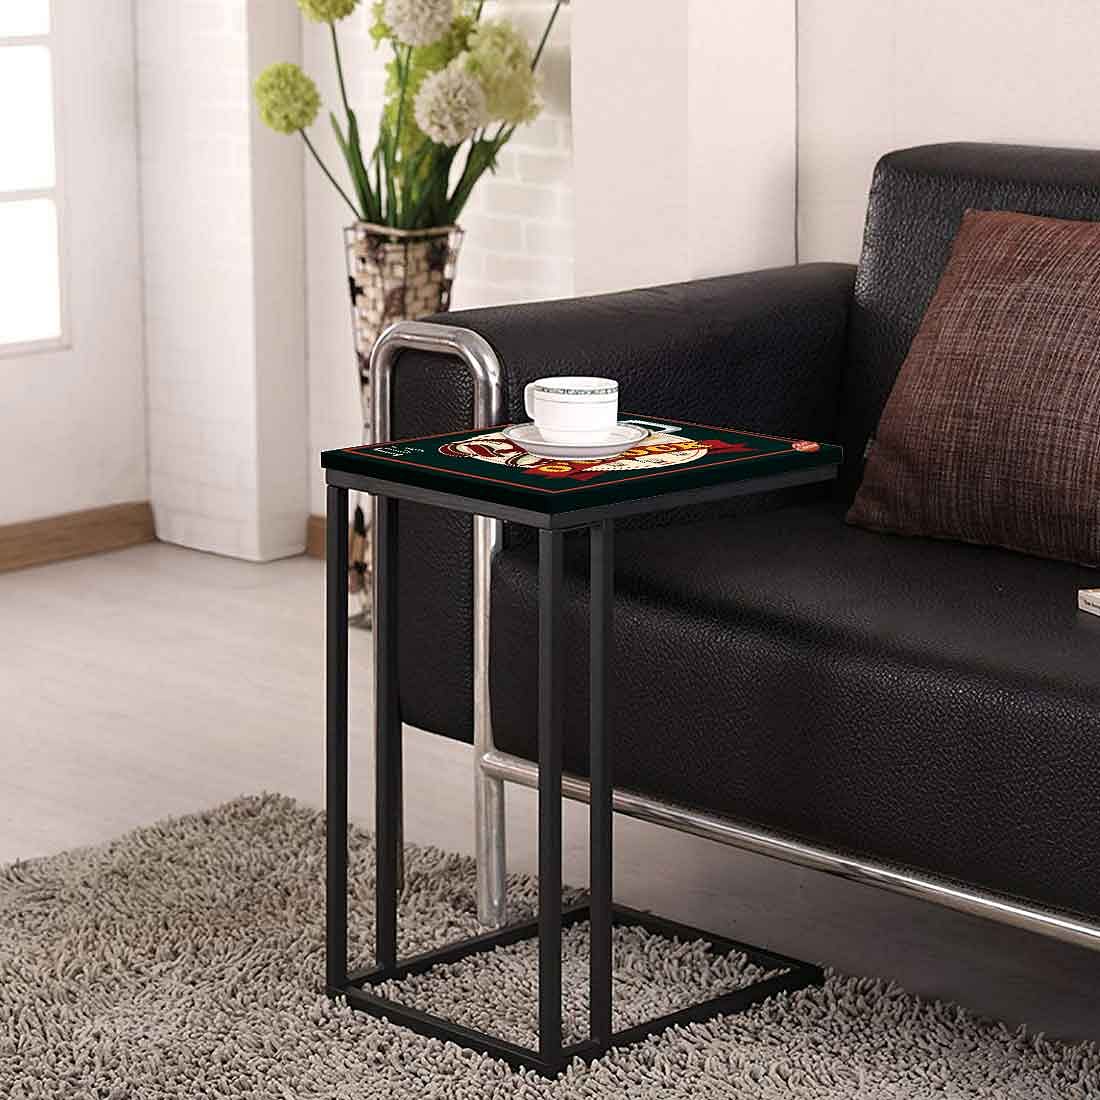 C Shaped Side Table For Sofa - Beer O'Clock Nutcase